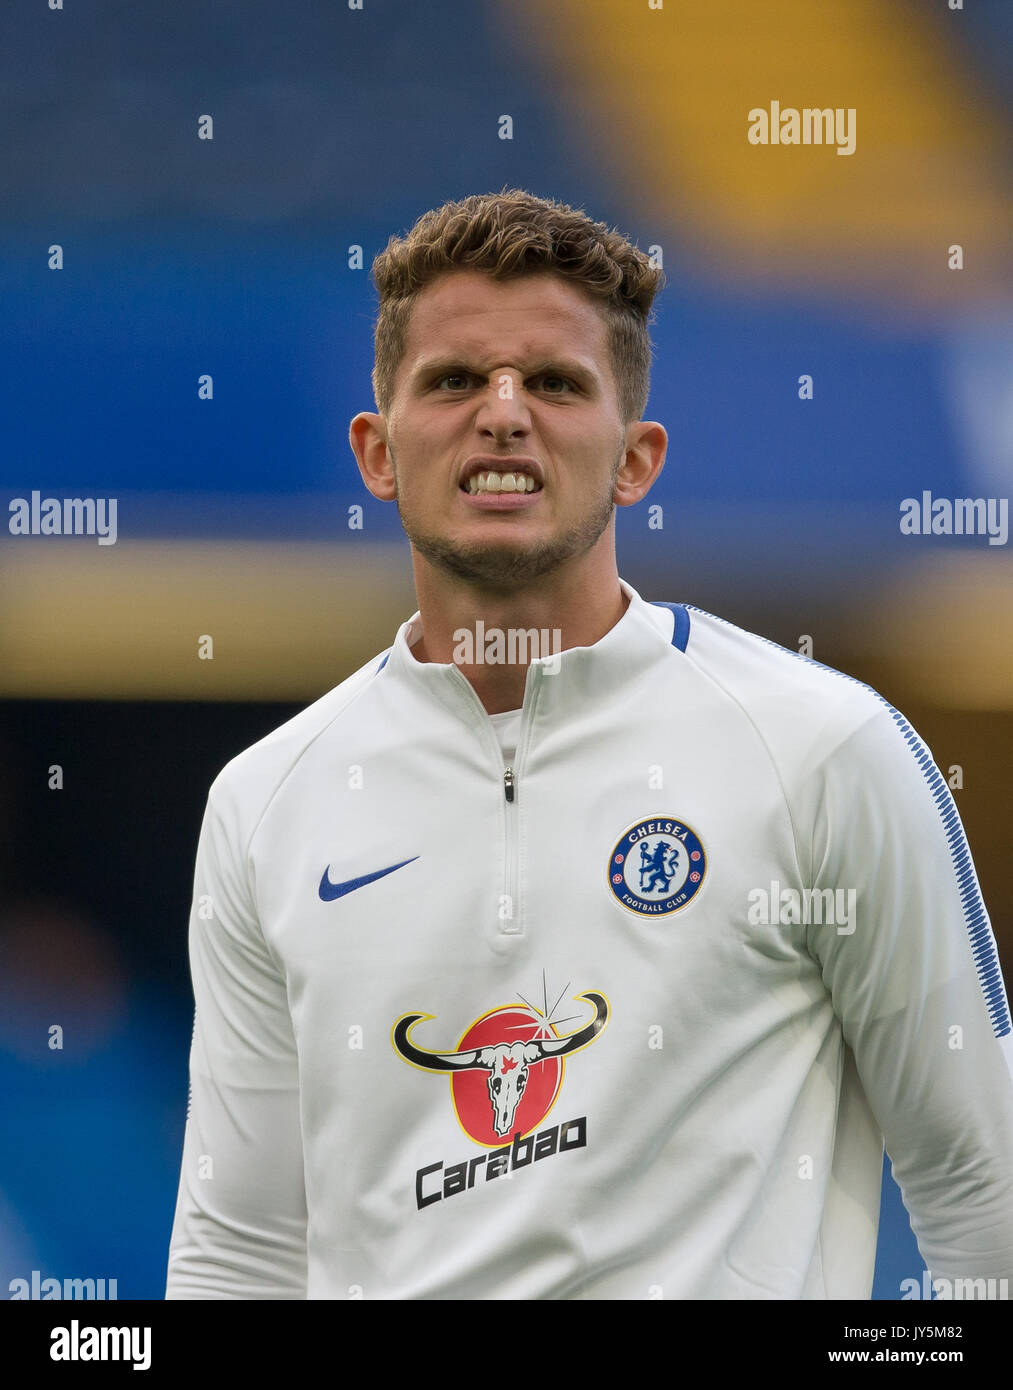 London, 18th Aug, 2017. Jordan HOUGHTON of Chelsea warms up during U23 Premier League 2 match and Derby County at Stamford Bridge, London, England on 18 August 2017.